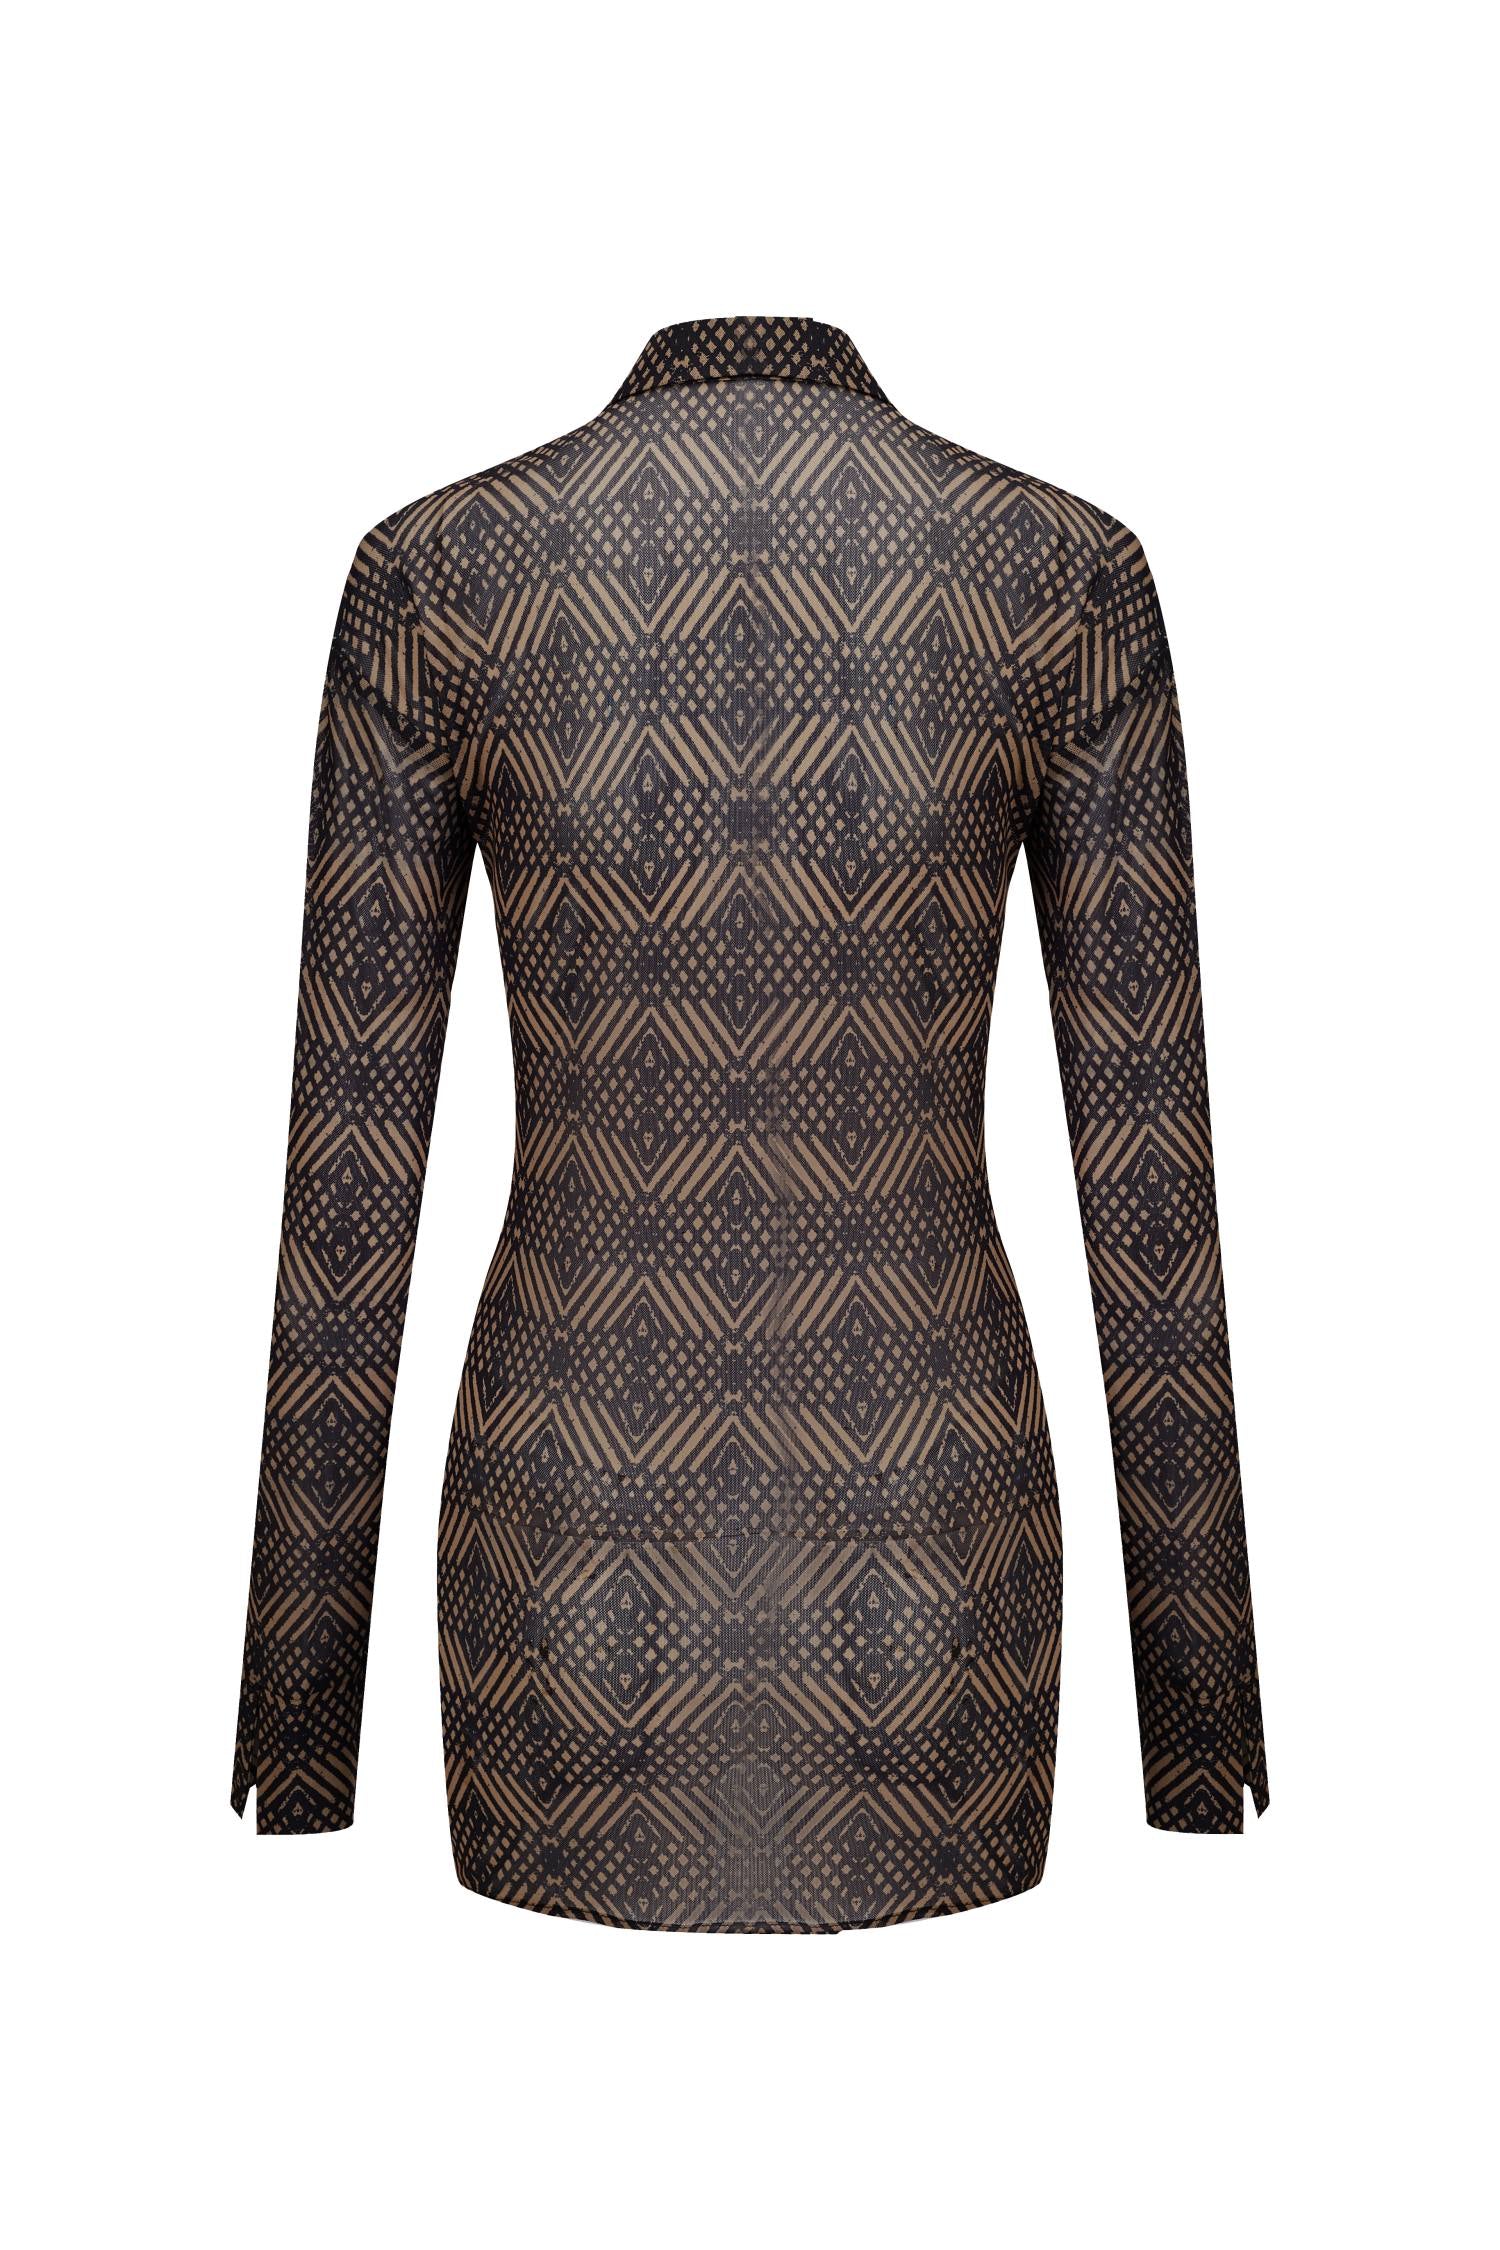 UUNIQ FEARLESS Mesh Mini Dress With Long Sleeve In Brown